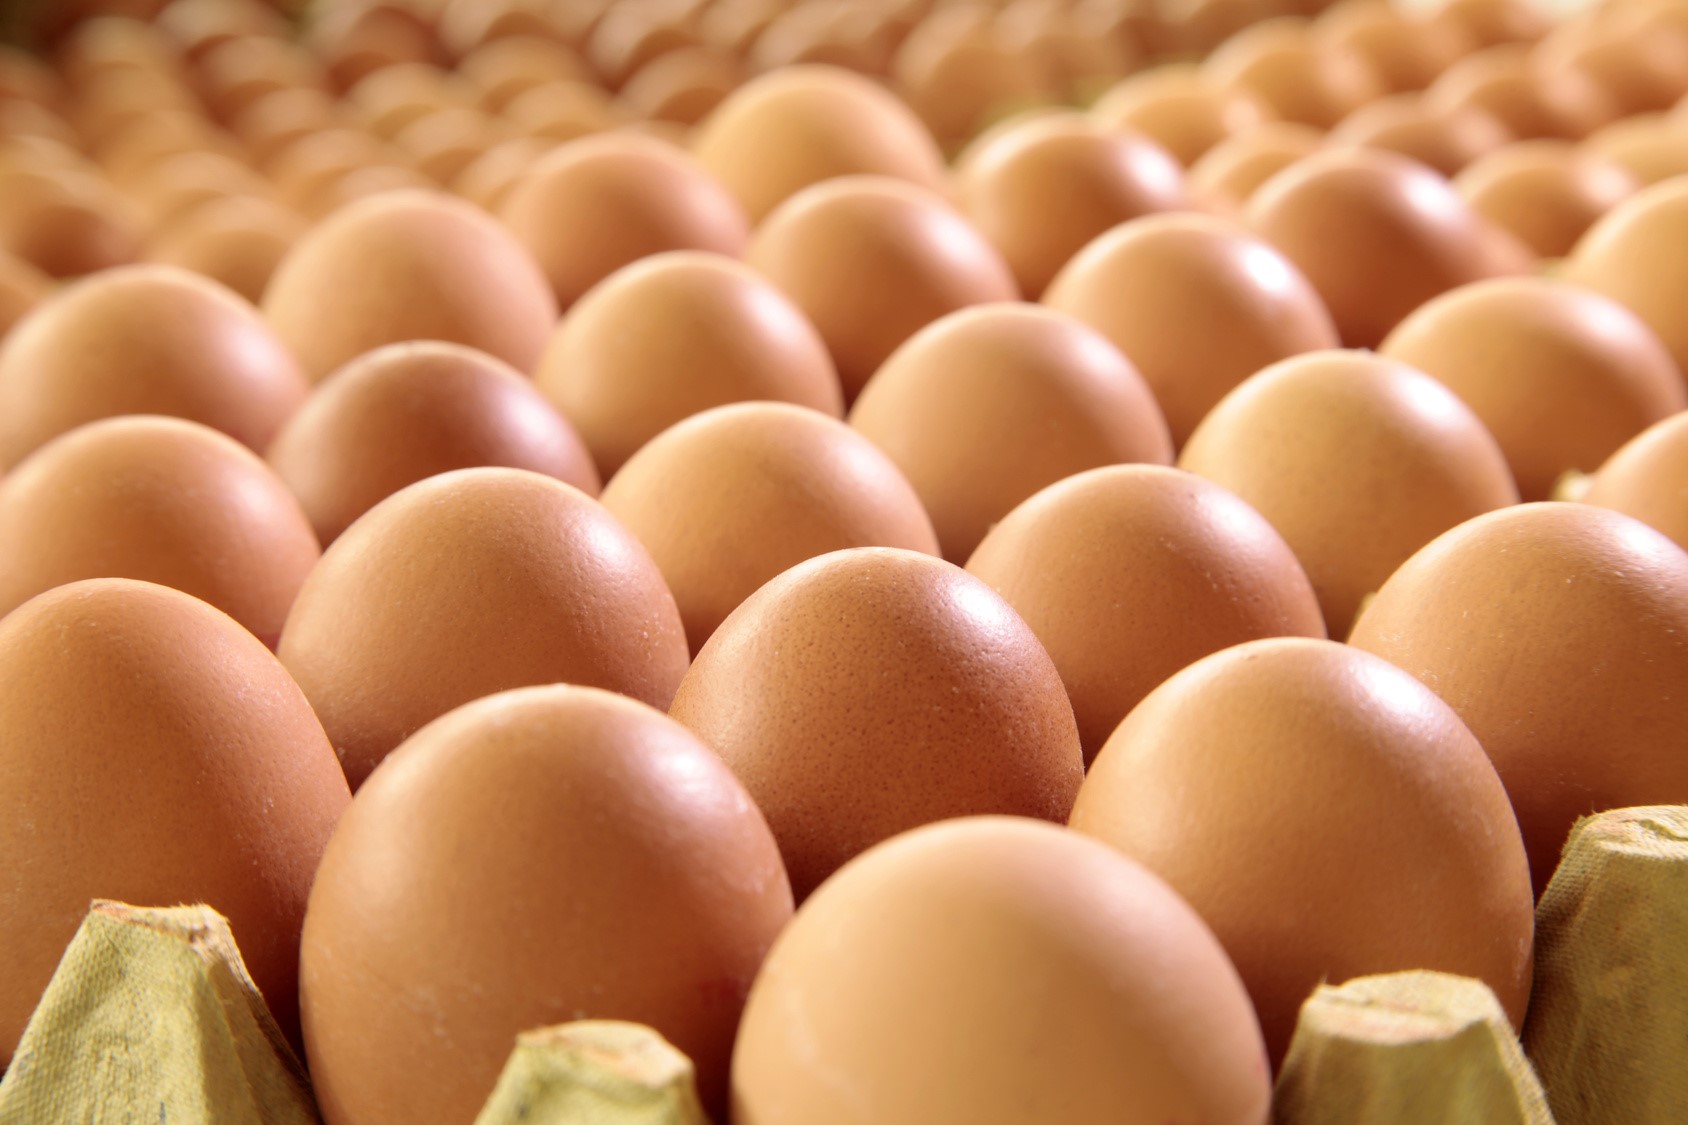 Supermarkets limit egg sales due to ‘supply issues’